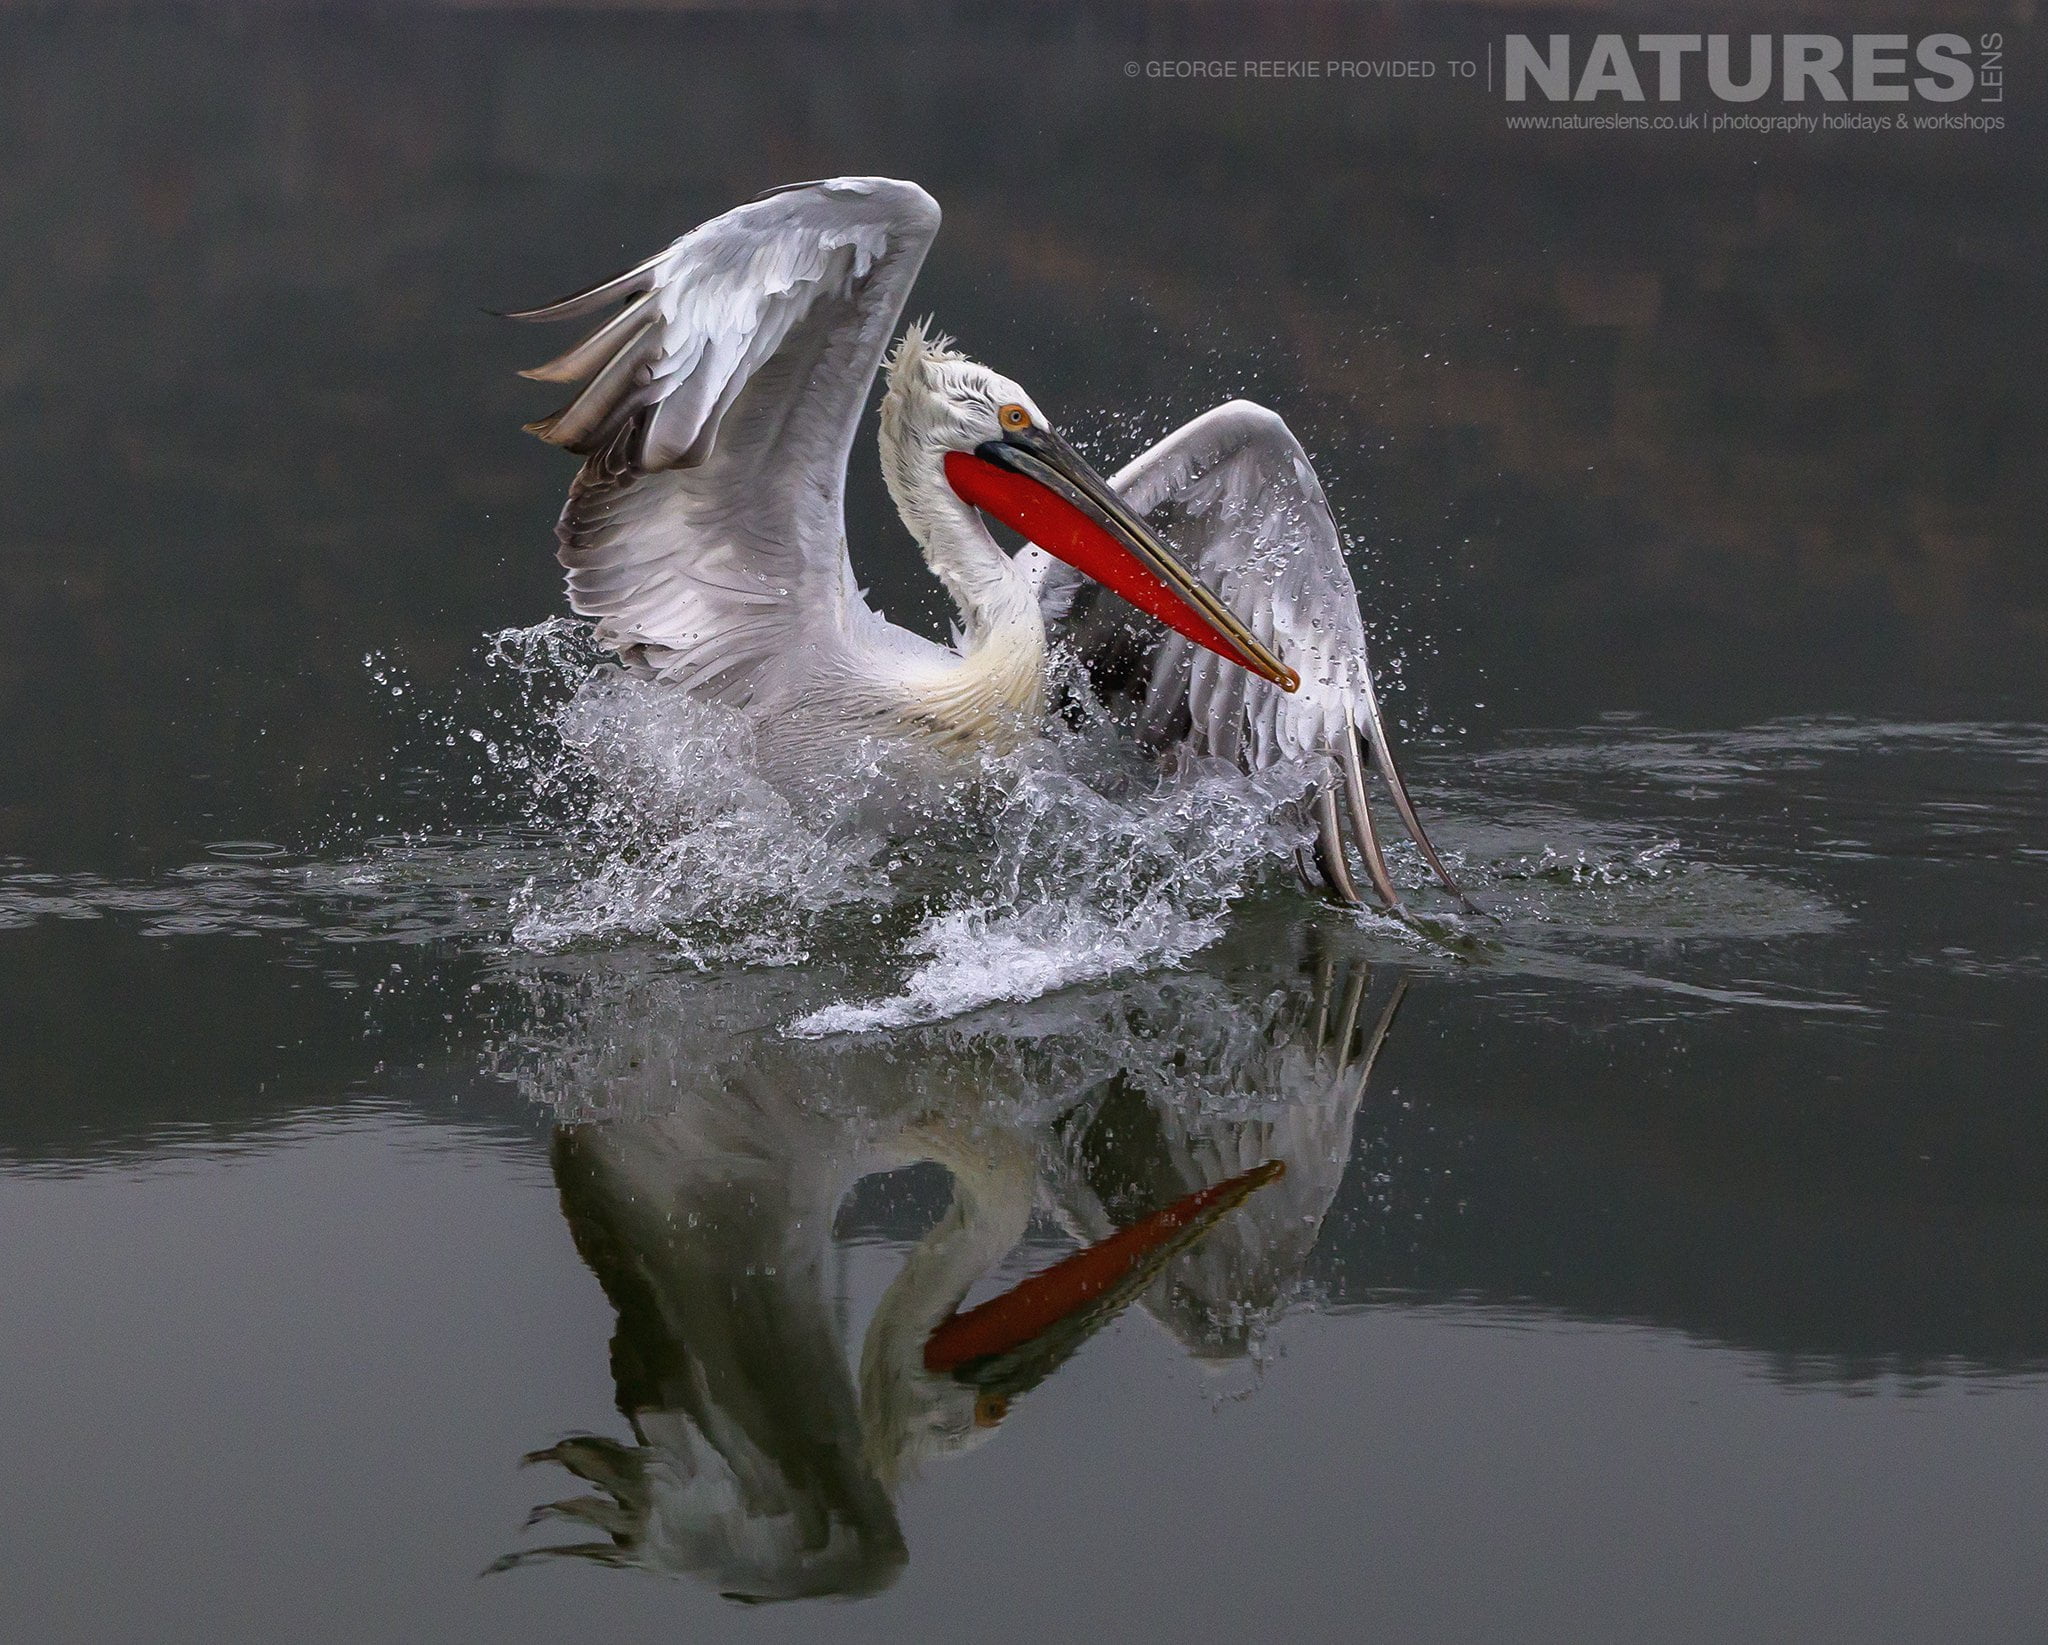 One of Kerkinis Dalmatian Pelicans making quite a splash in the waters of the lake photographed during one of the NaturesLens Dalmatian Pelican Photography Holidays